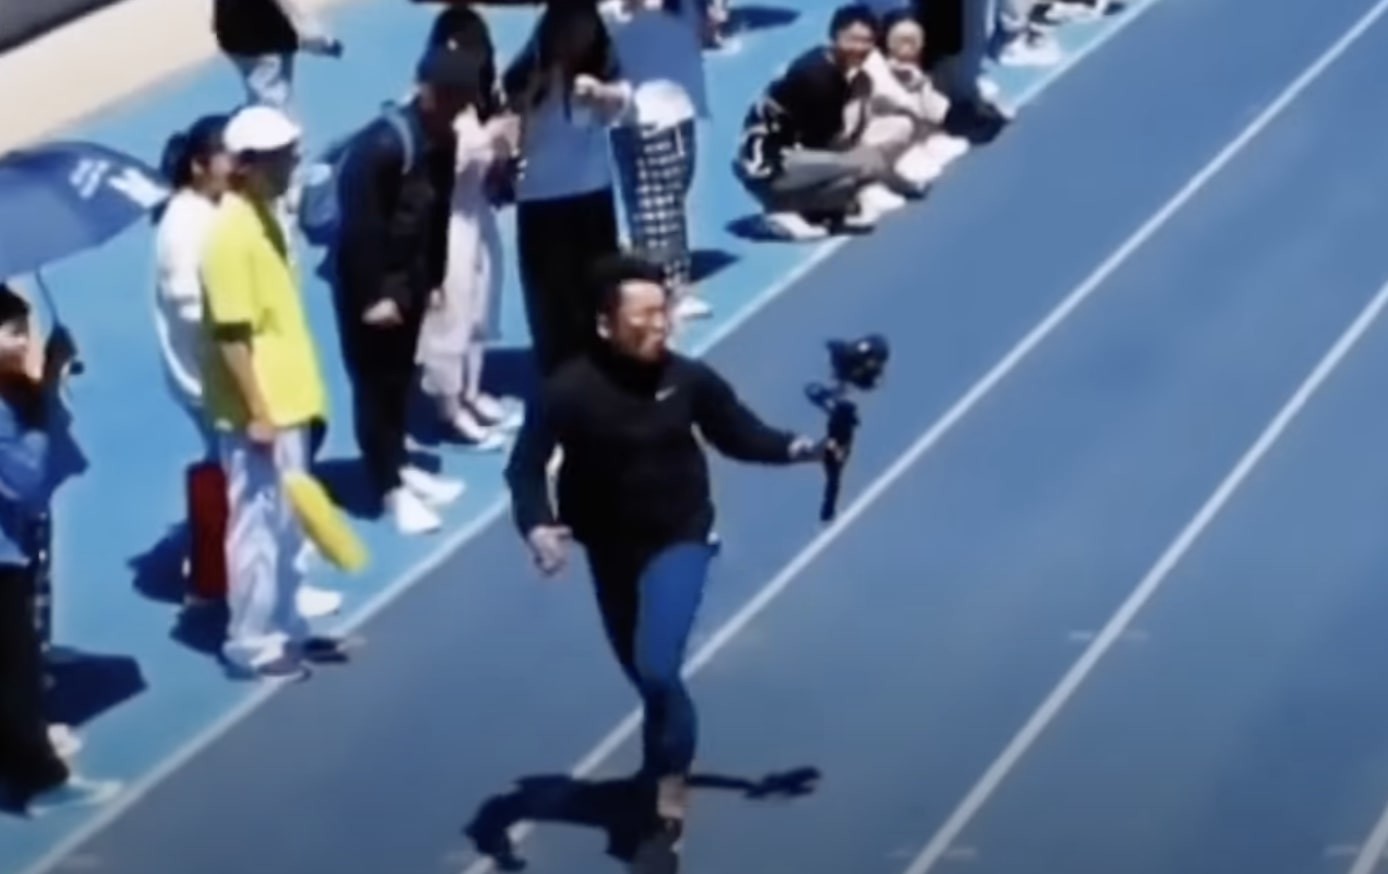 A university student in China serving as a Cameraman, beats sprinters to the line in 100m race